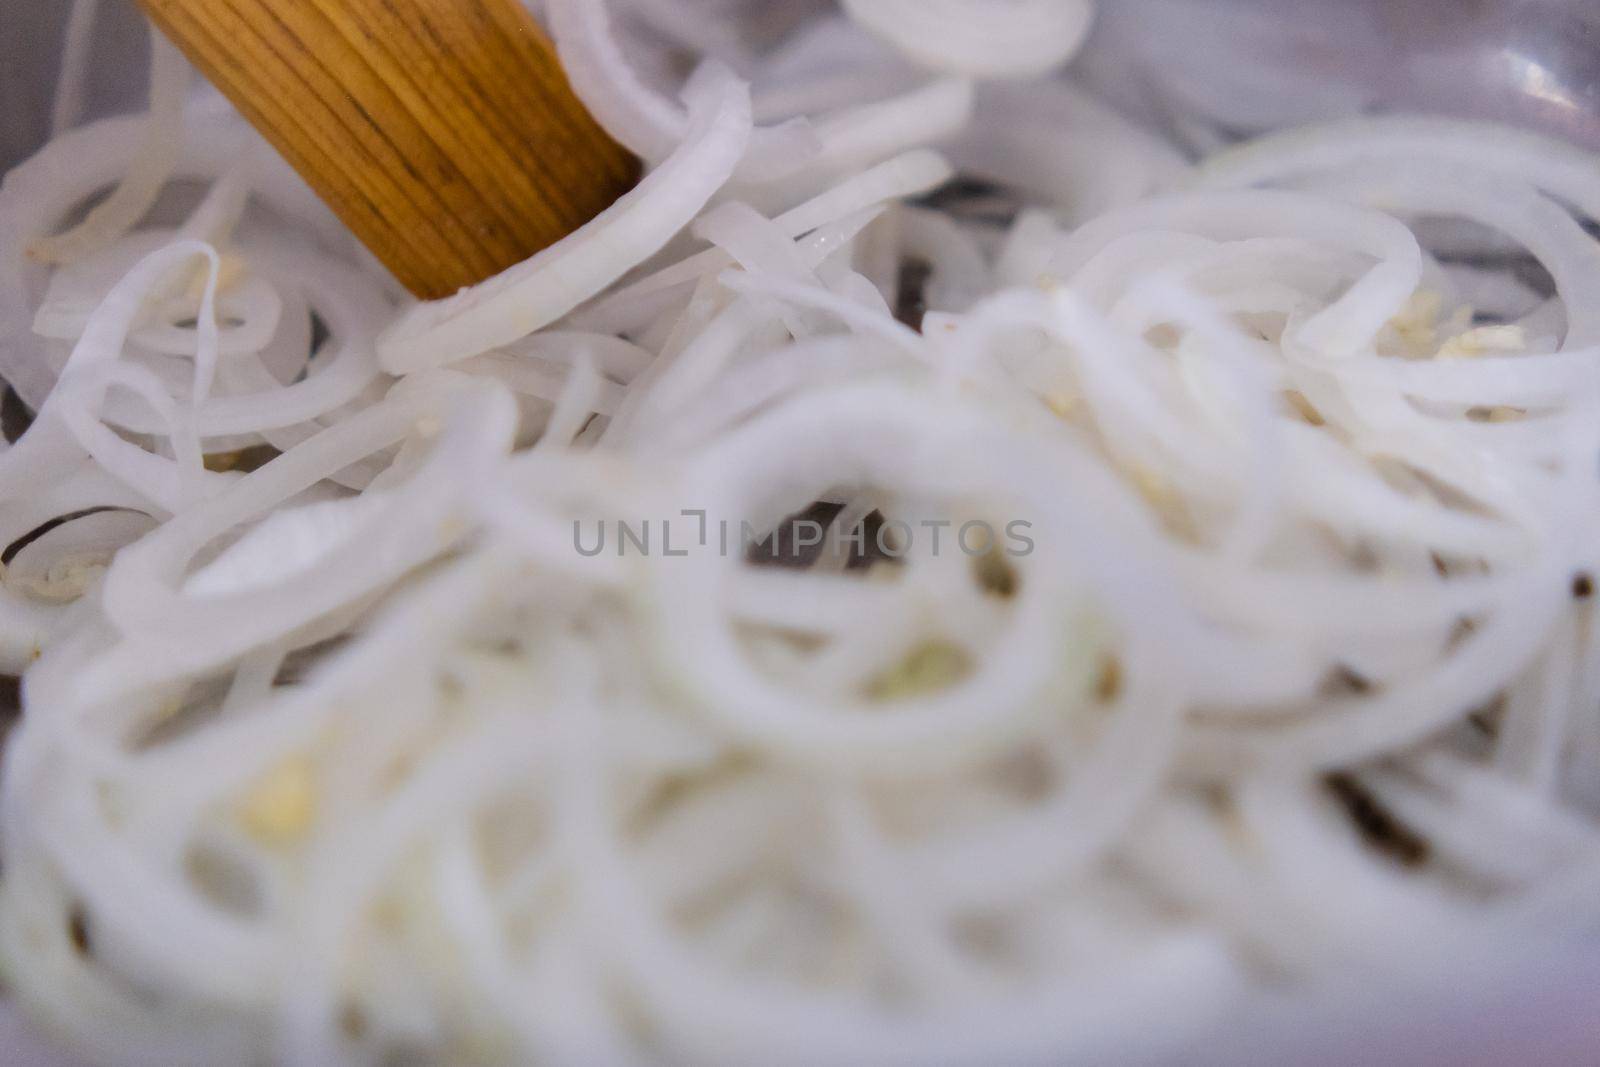 Extreme close-up of wooden spoon on group of onion slices in metal pot. Cooking fresh pile of sliced white vegetable in pot. Healthy meal preparation